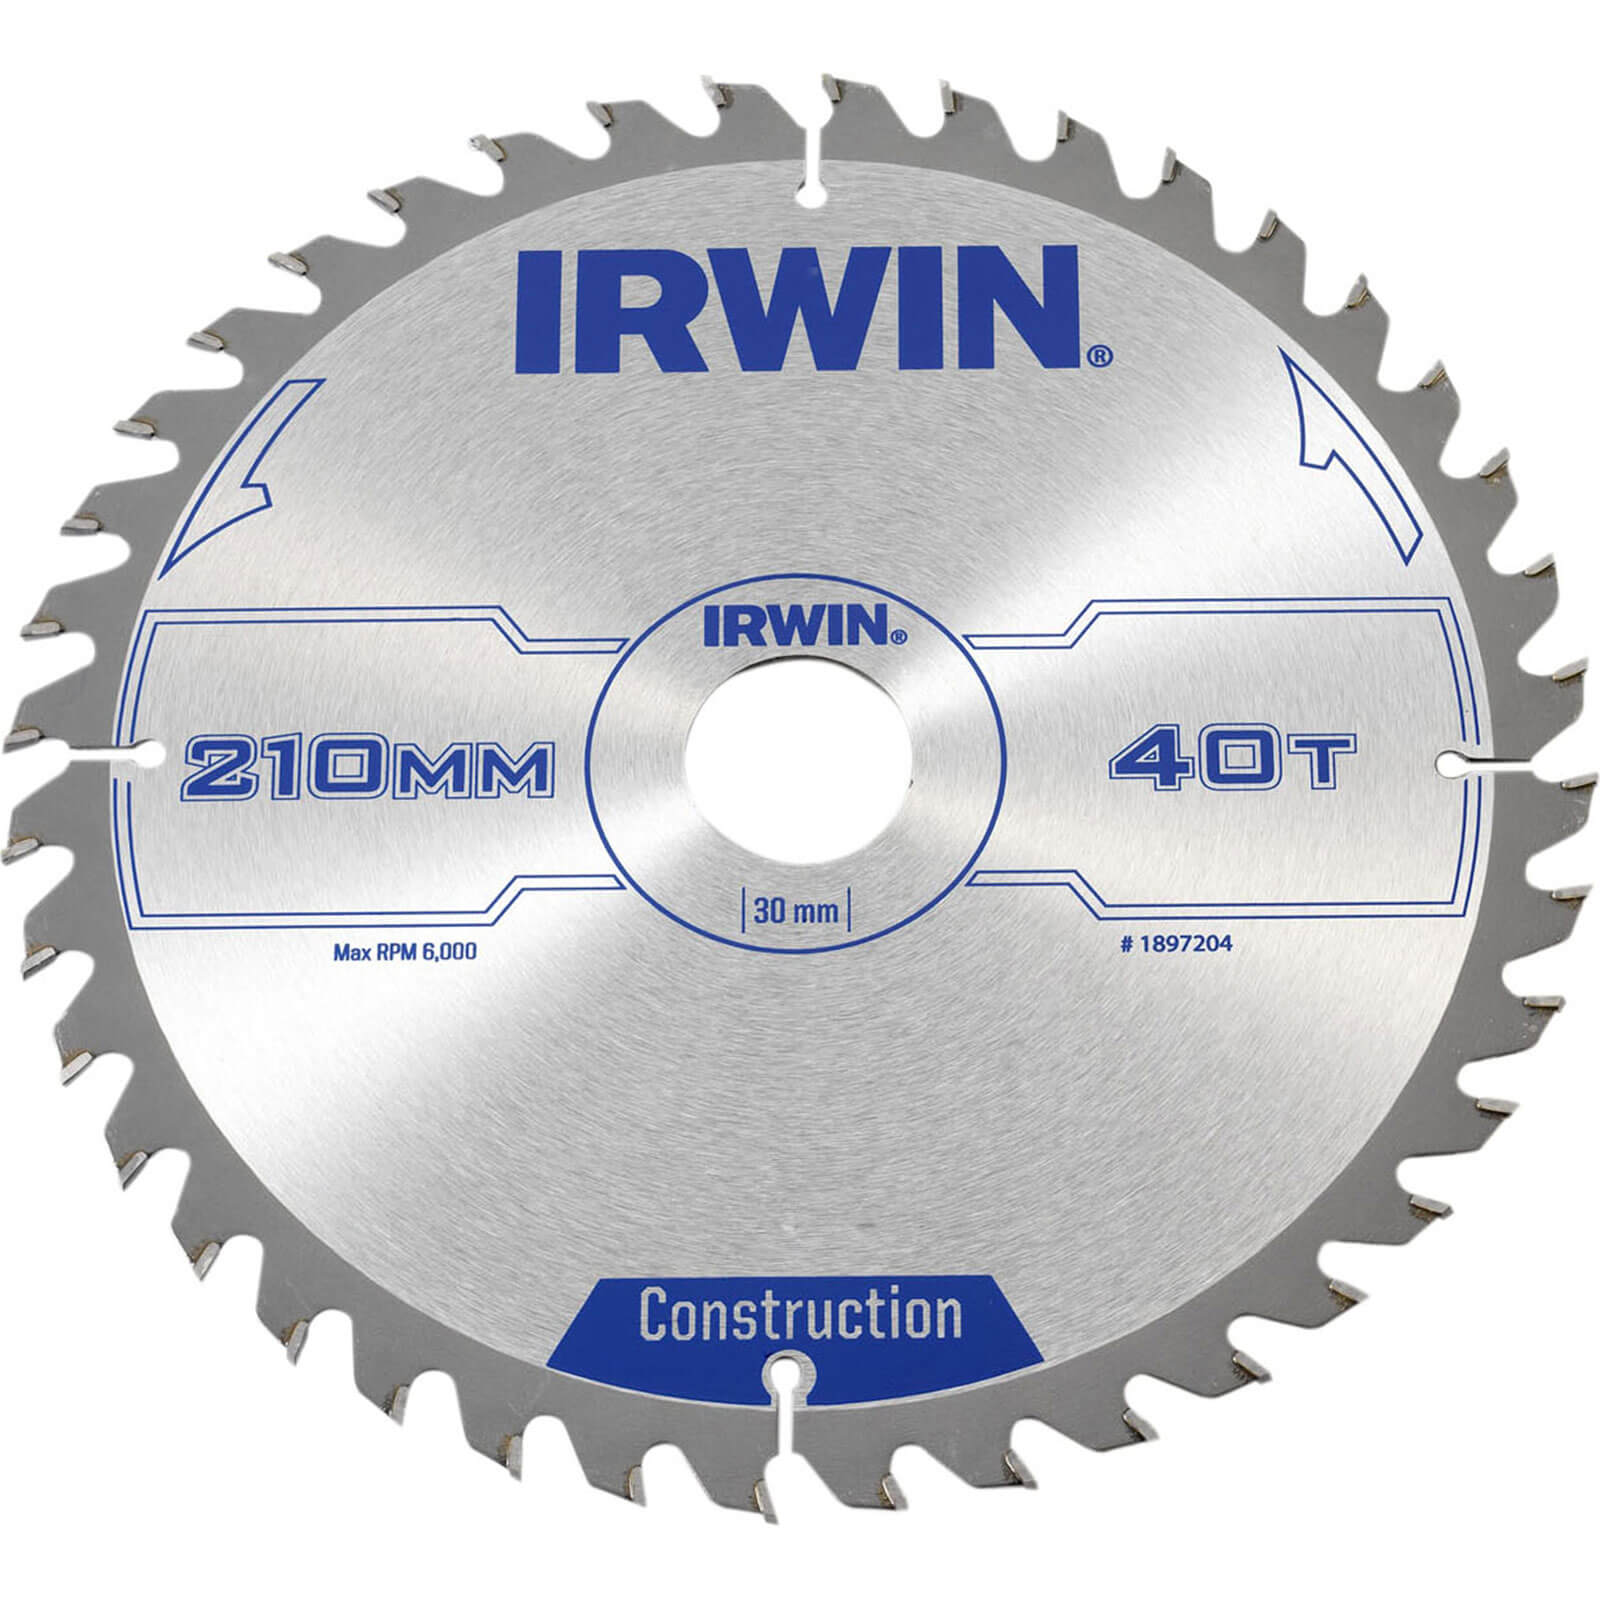 Image of Irwin ATB Construction Circular Saw Blade 210mm 40T 30mm